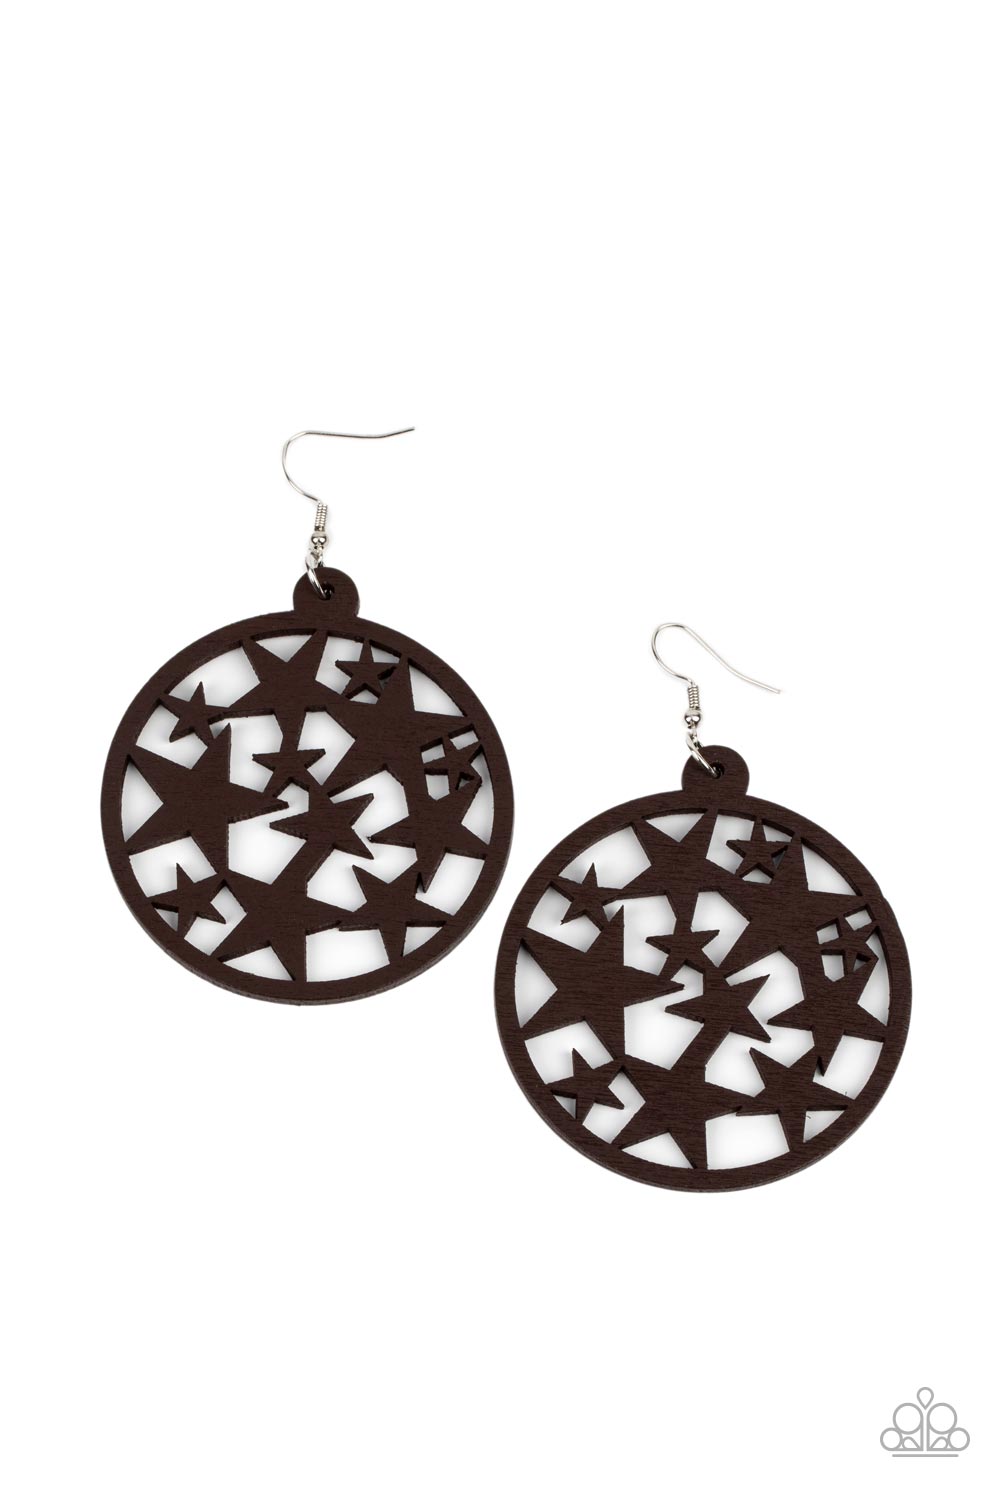 Cosmic Paradise Brown Wood Earrings - Paparazzi Accessories- lightbox - CarasShop.com - $5 Jewelry by Cara Jewels